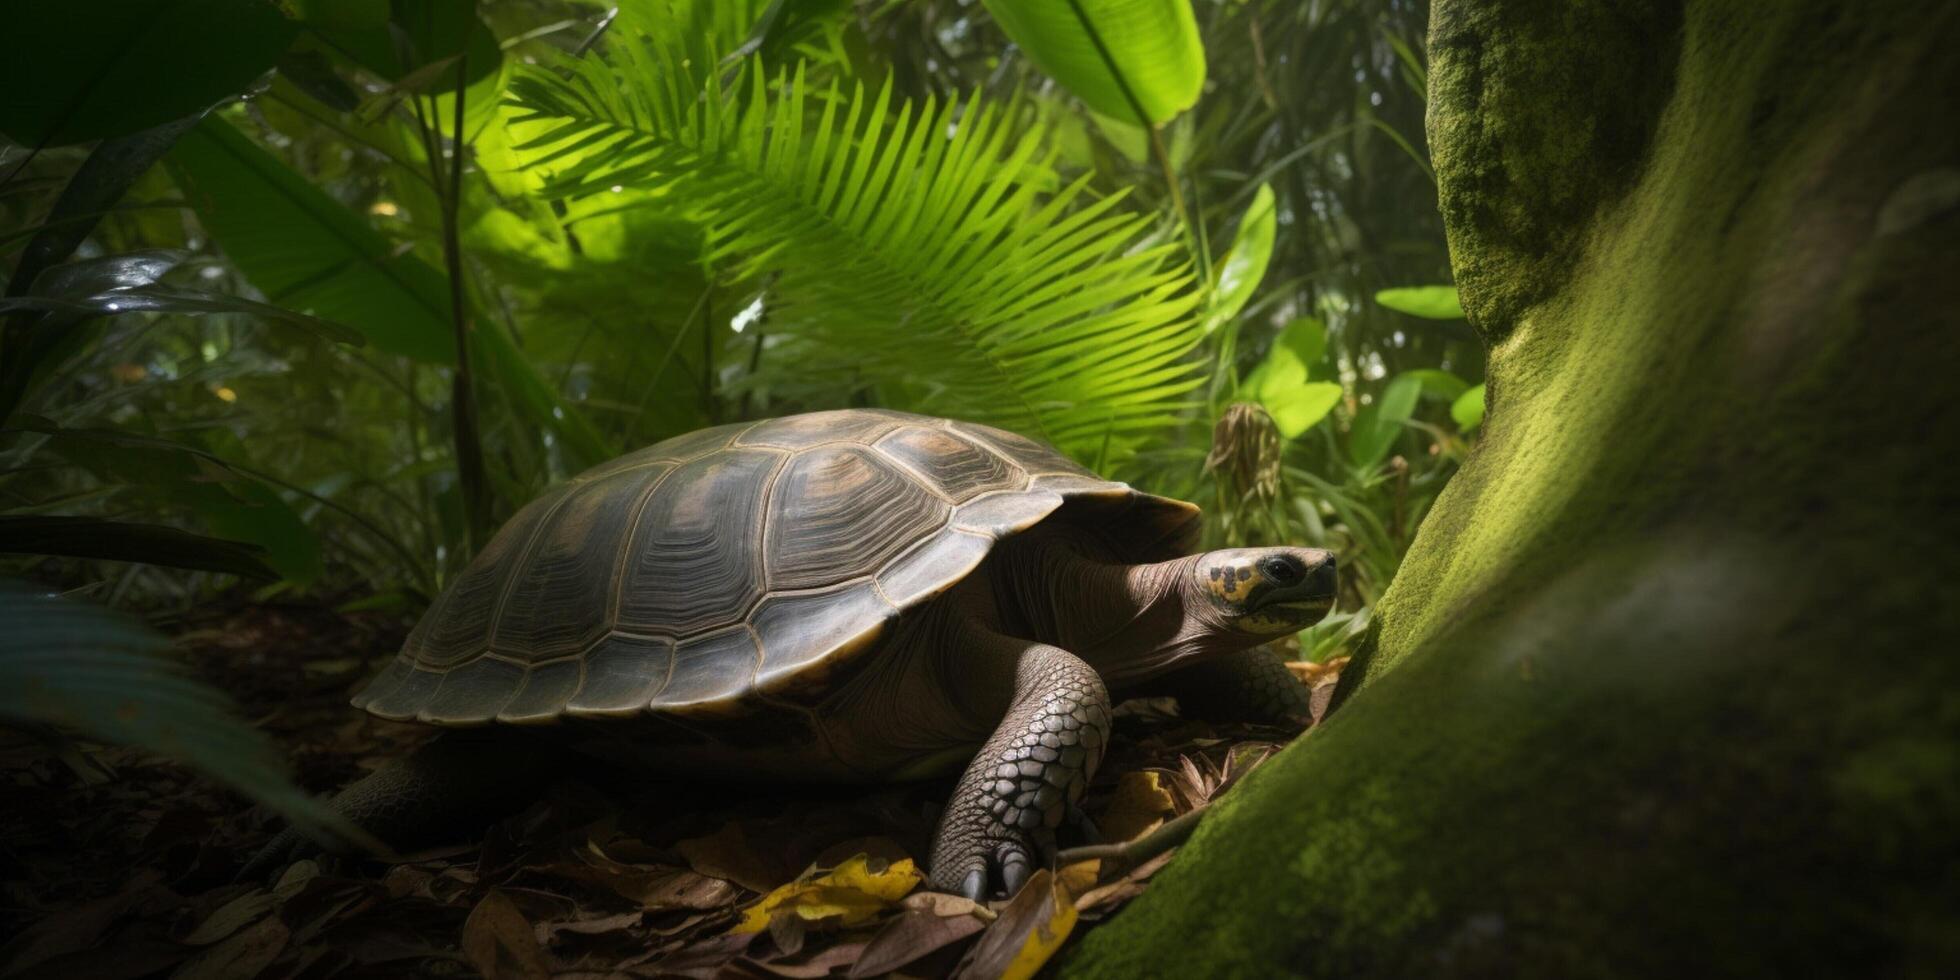 A tortoise in the jungle with a sunshine photo